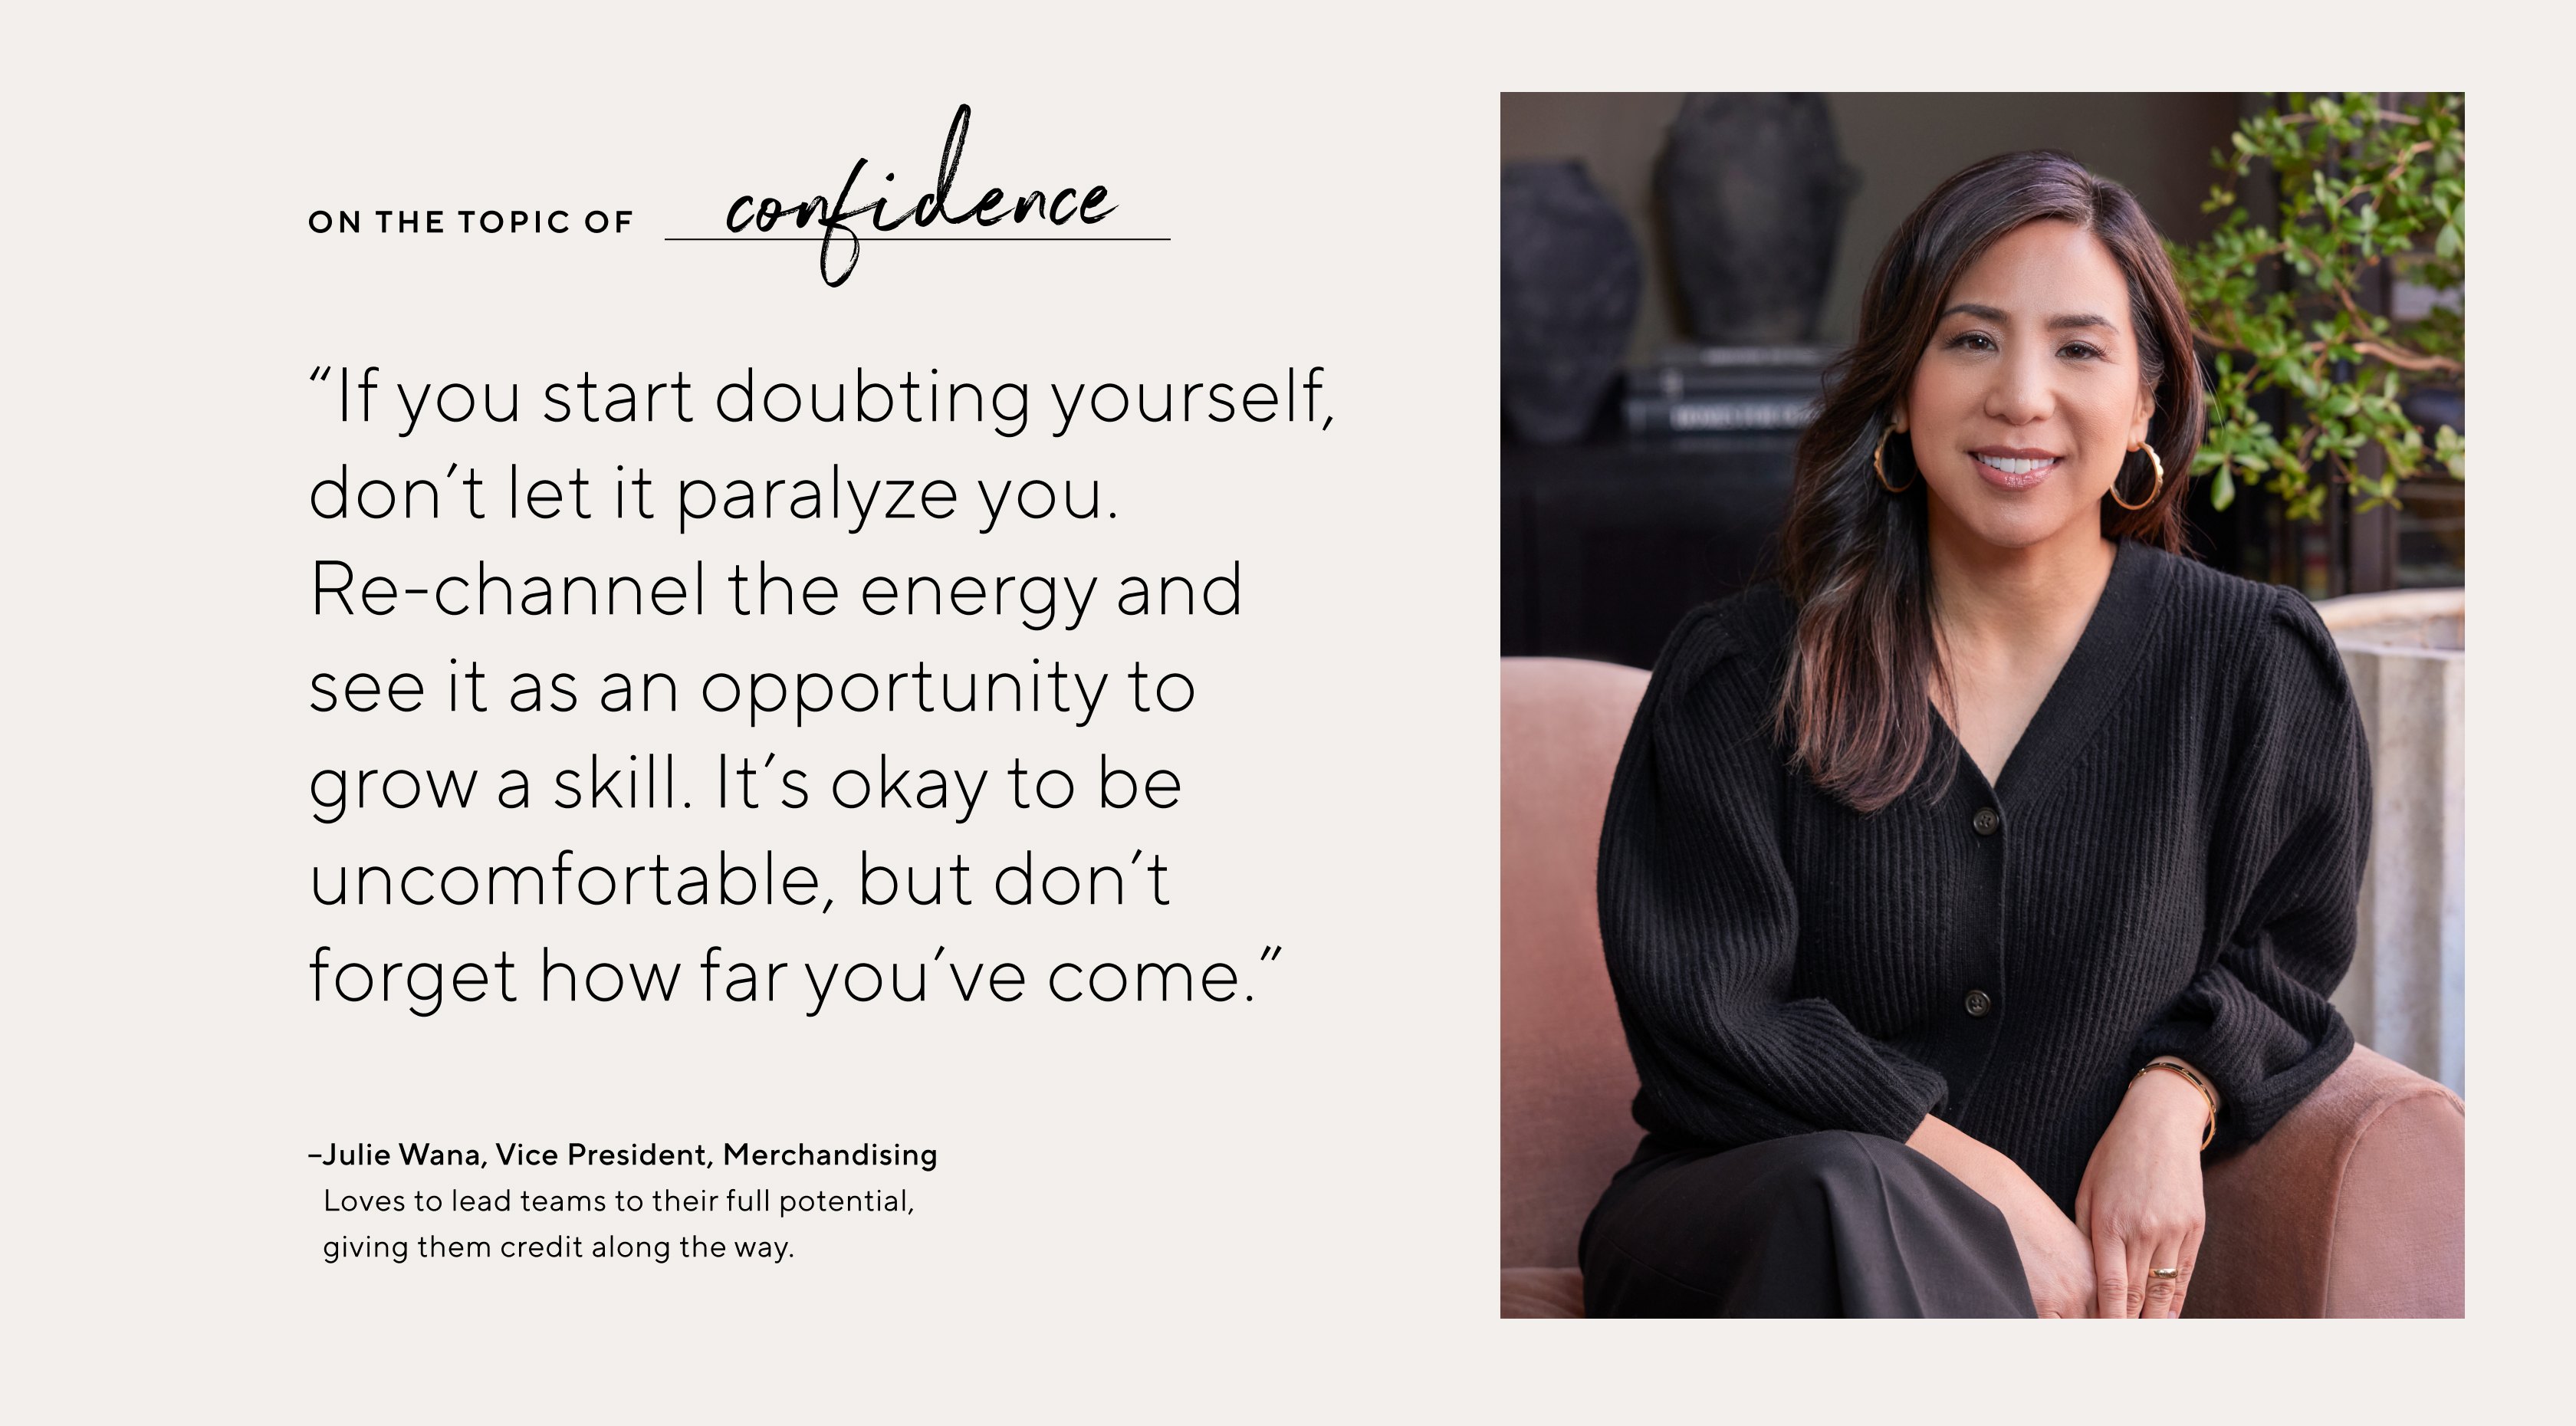 "If you start doubting yourself, don't let it paralyze you. Re-channel the energy and see it as an opportunity to grow a skill. It's okay to be uncomfortable, but don't forget how far you've come."